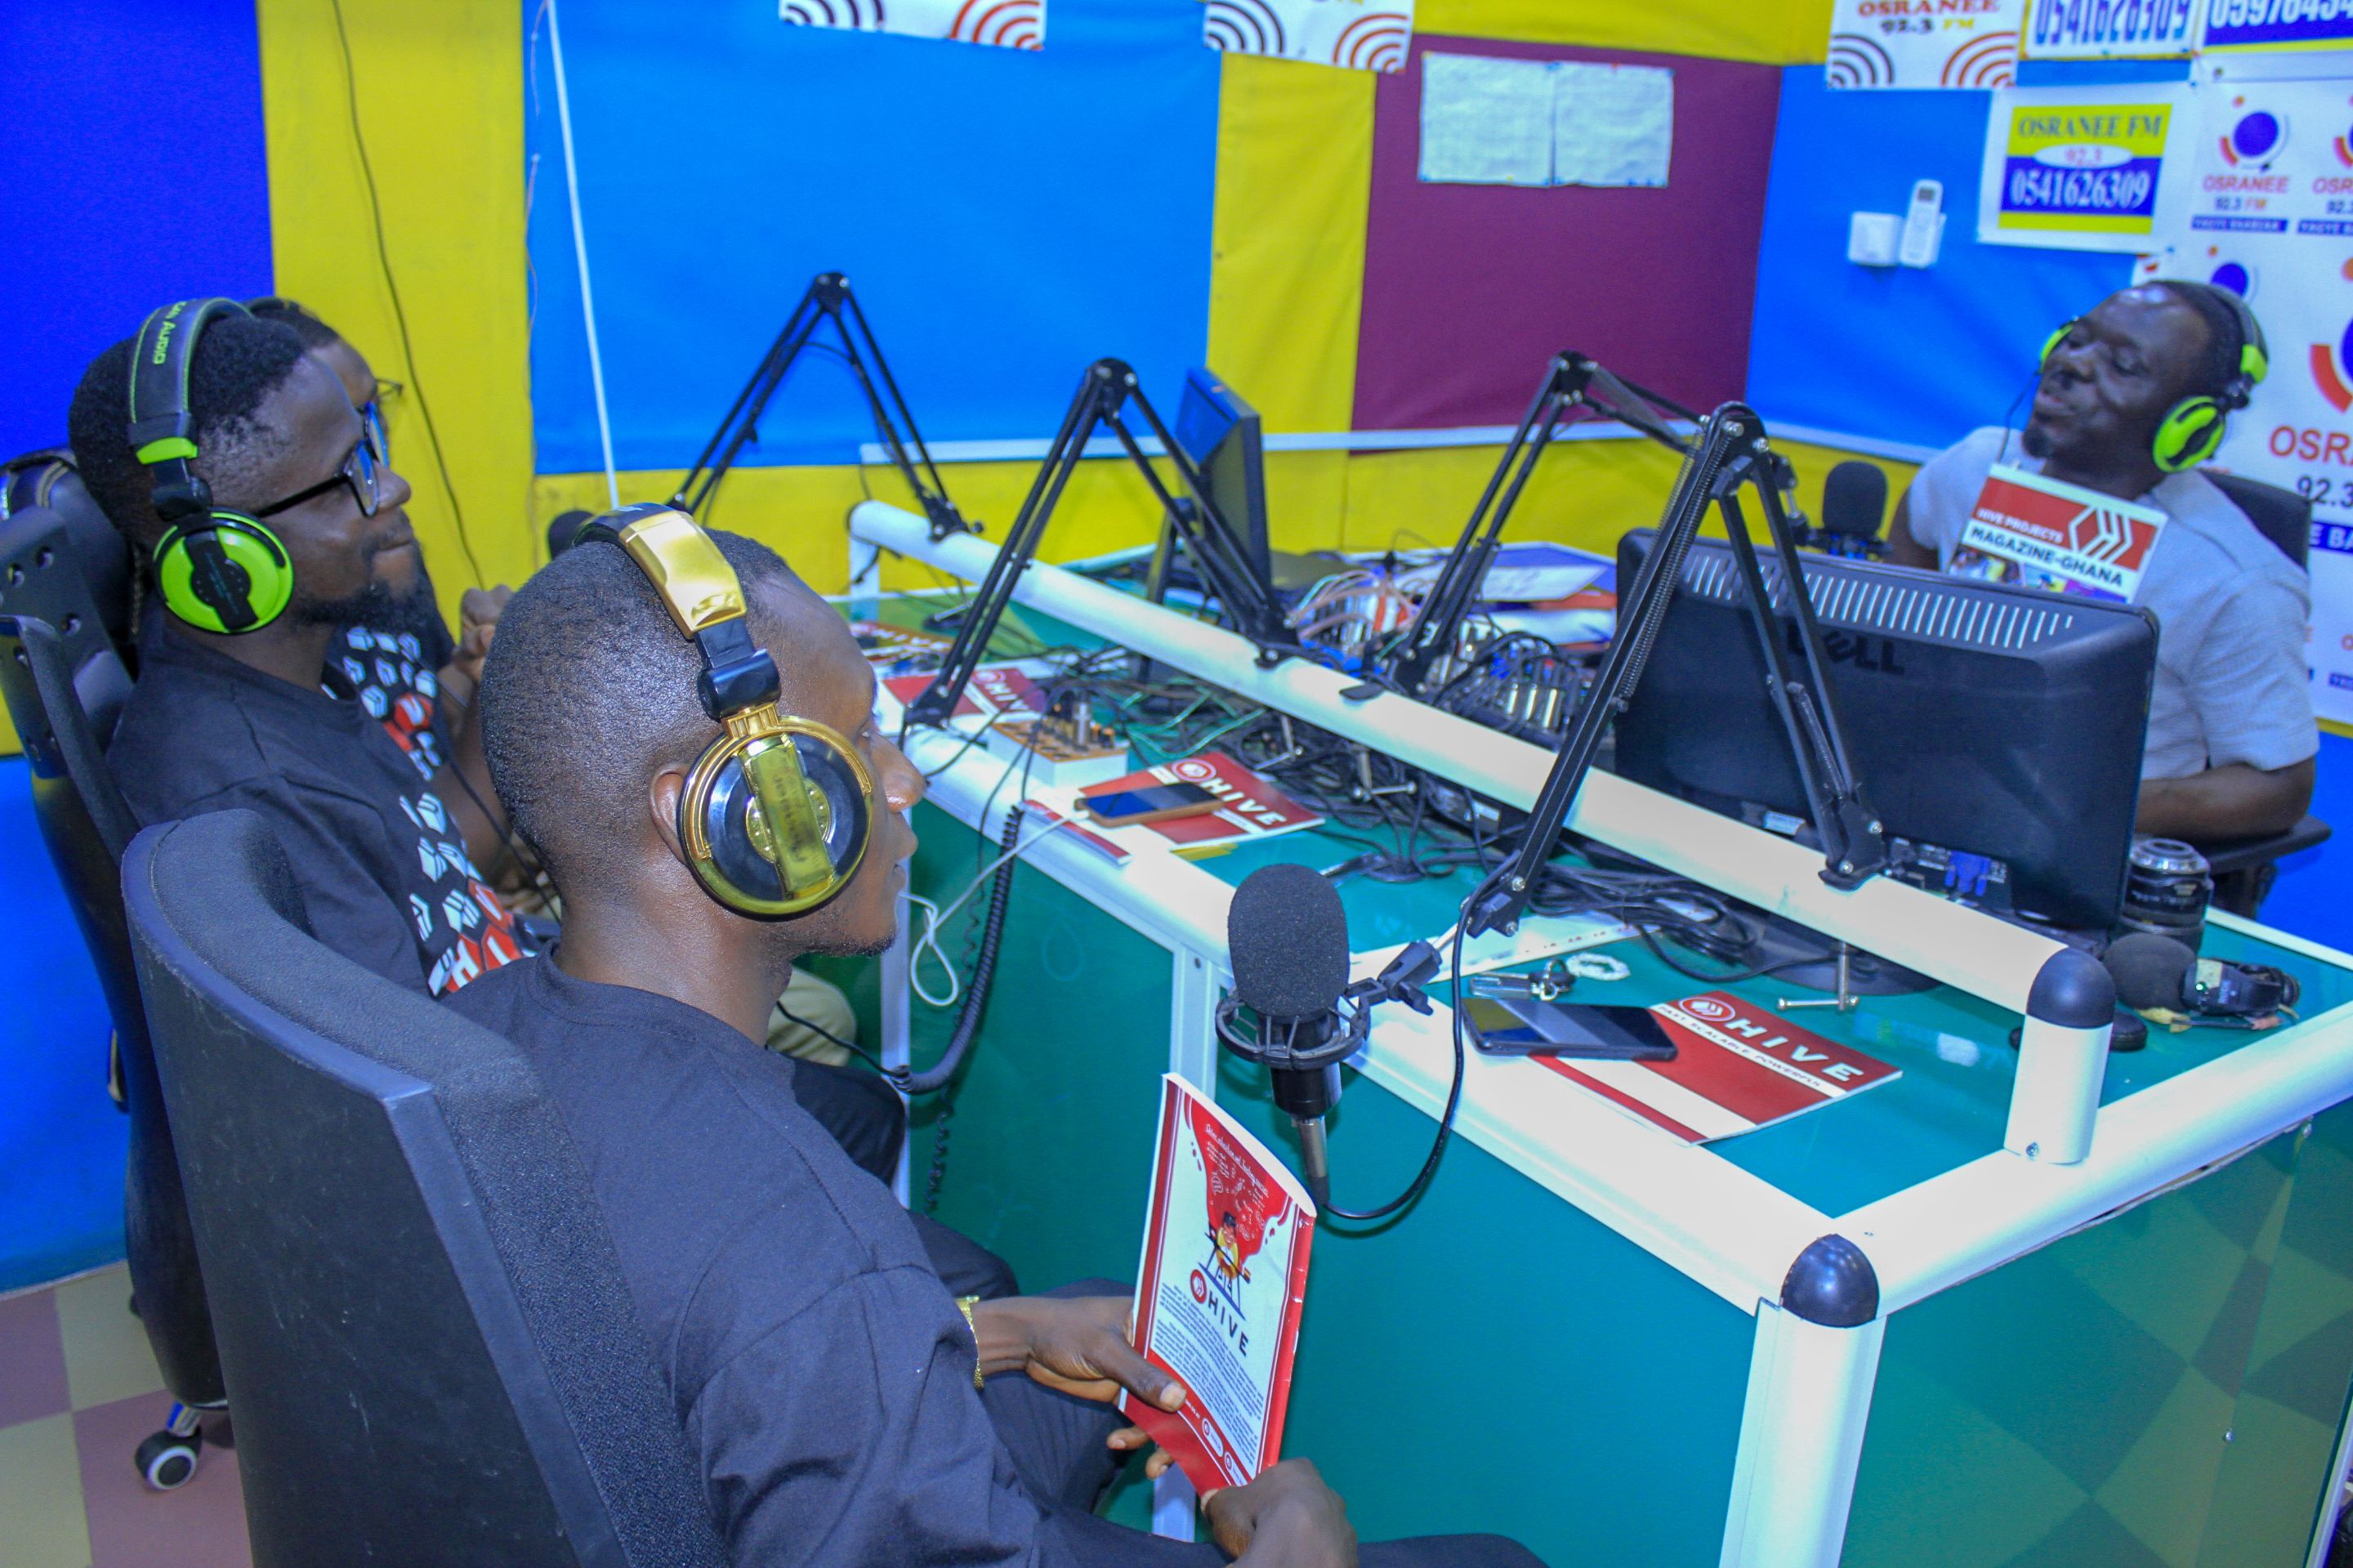 @mcsamm/hive-presented-a-magazine-to-a-media-personality-during-radio-interview